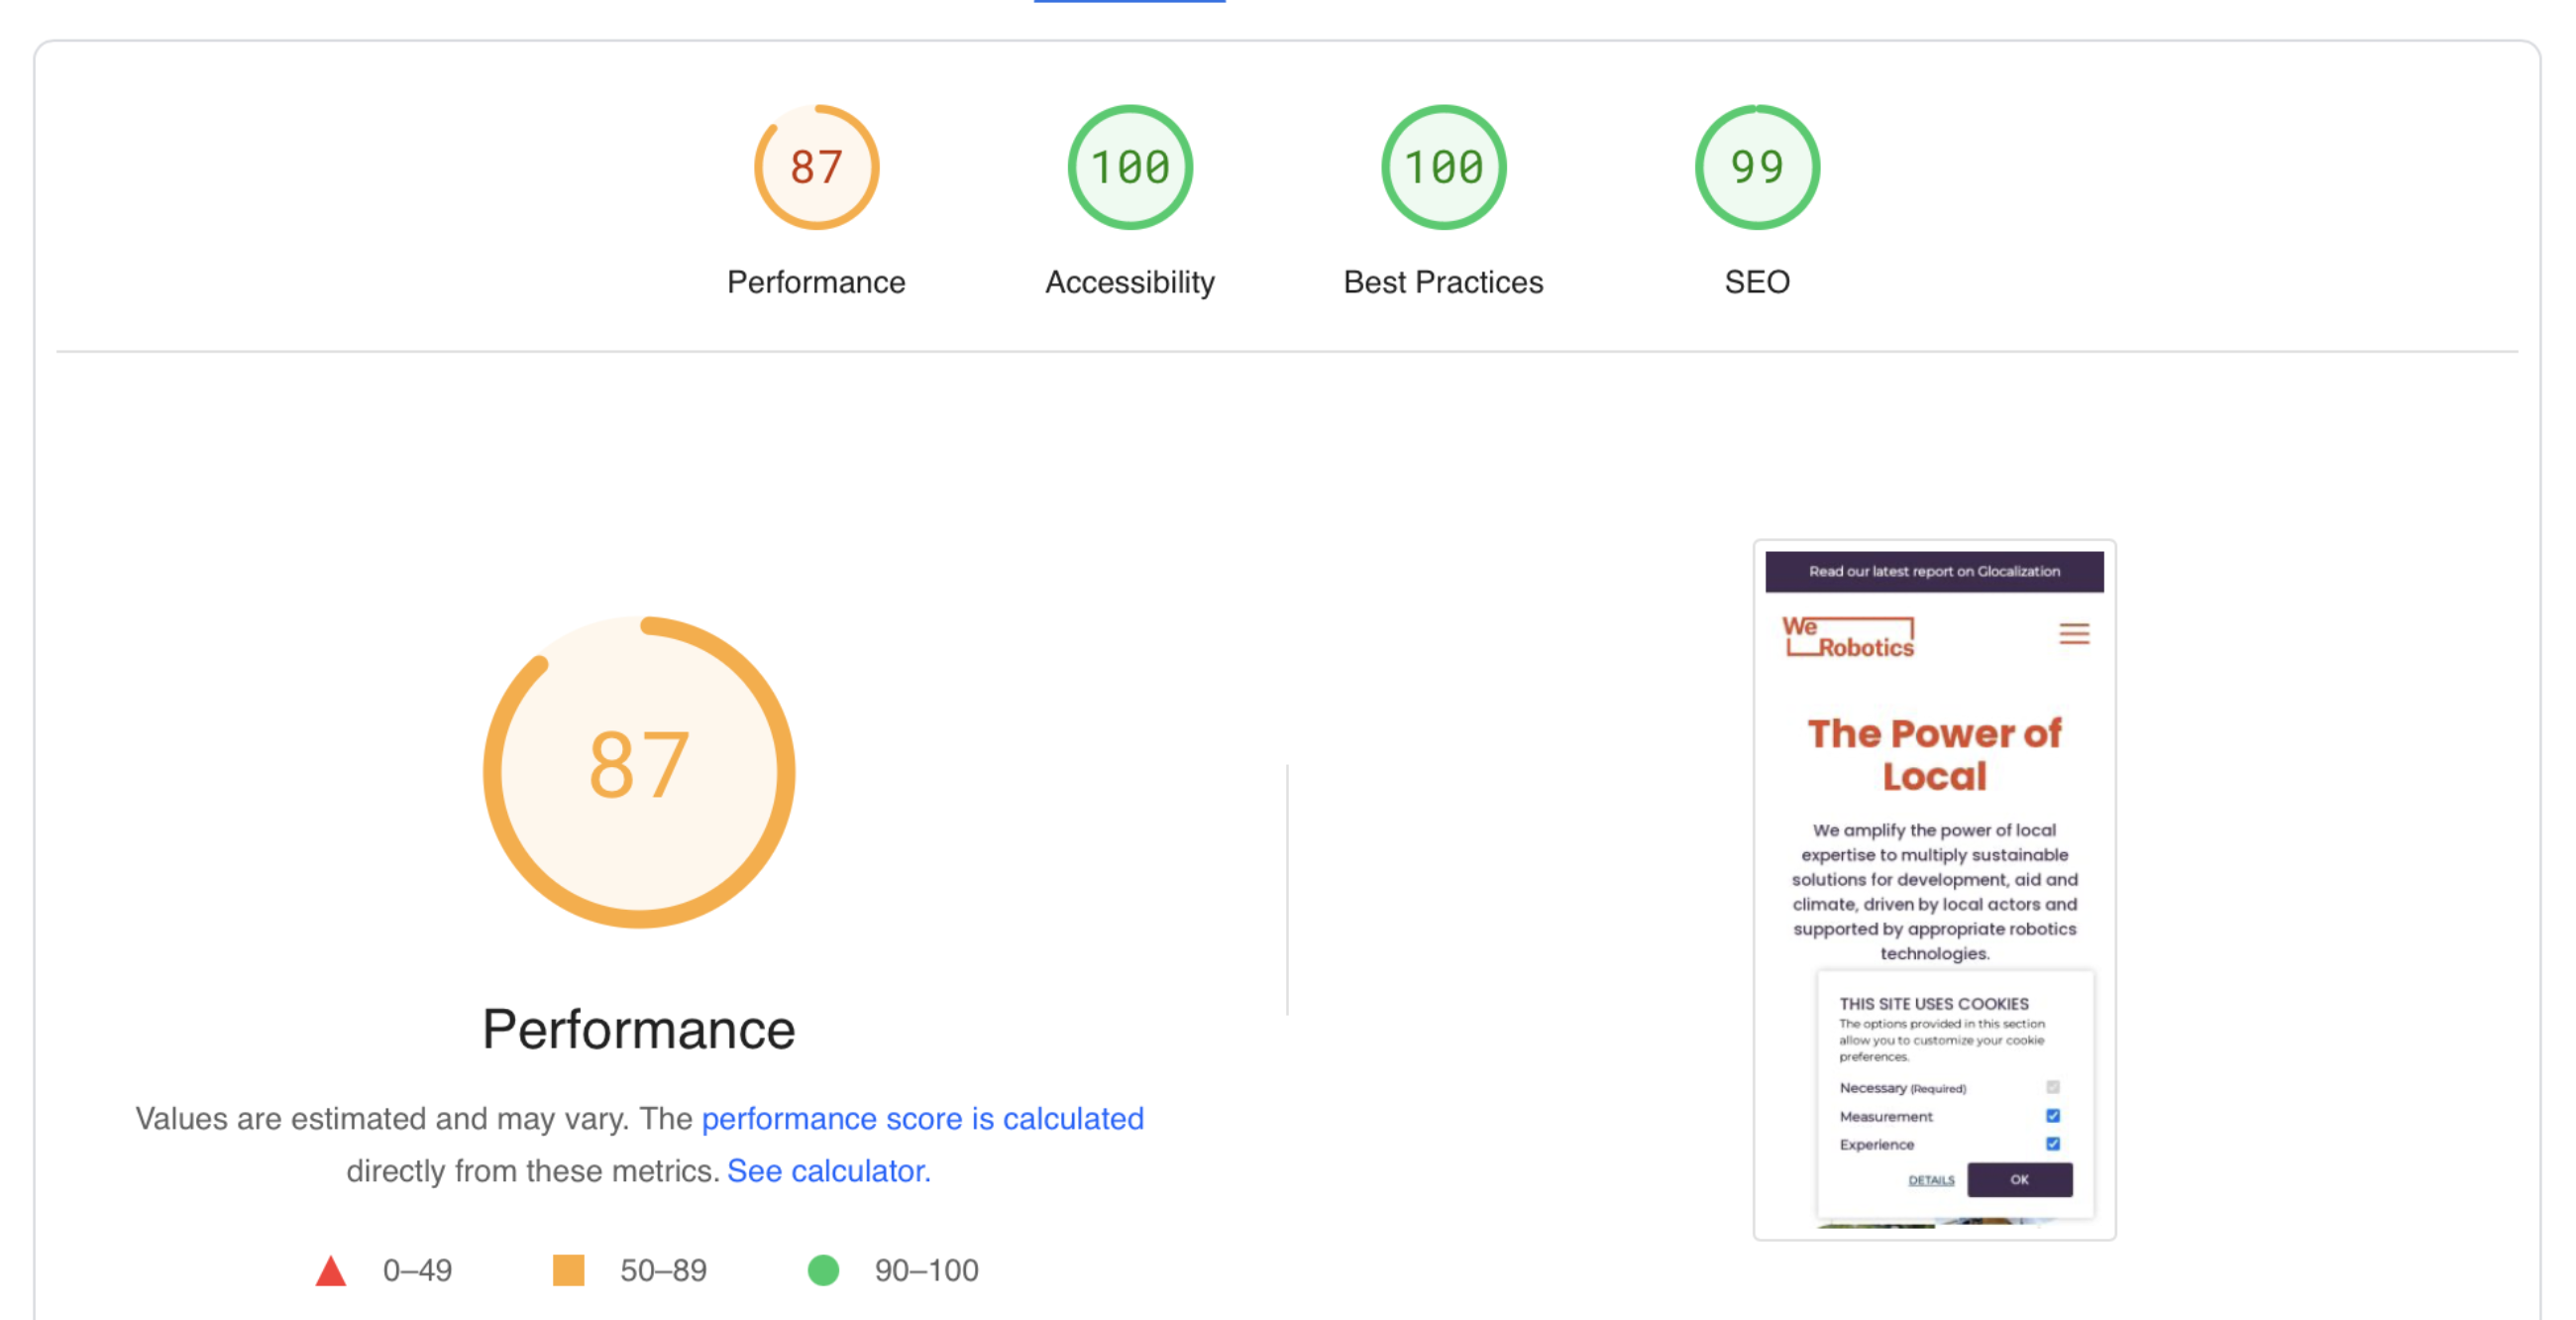 Lighthouse scores showing 87 performance, 100 accessibility, 100 best practices, 99 SEO